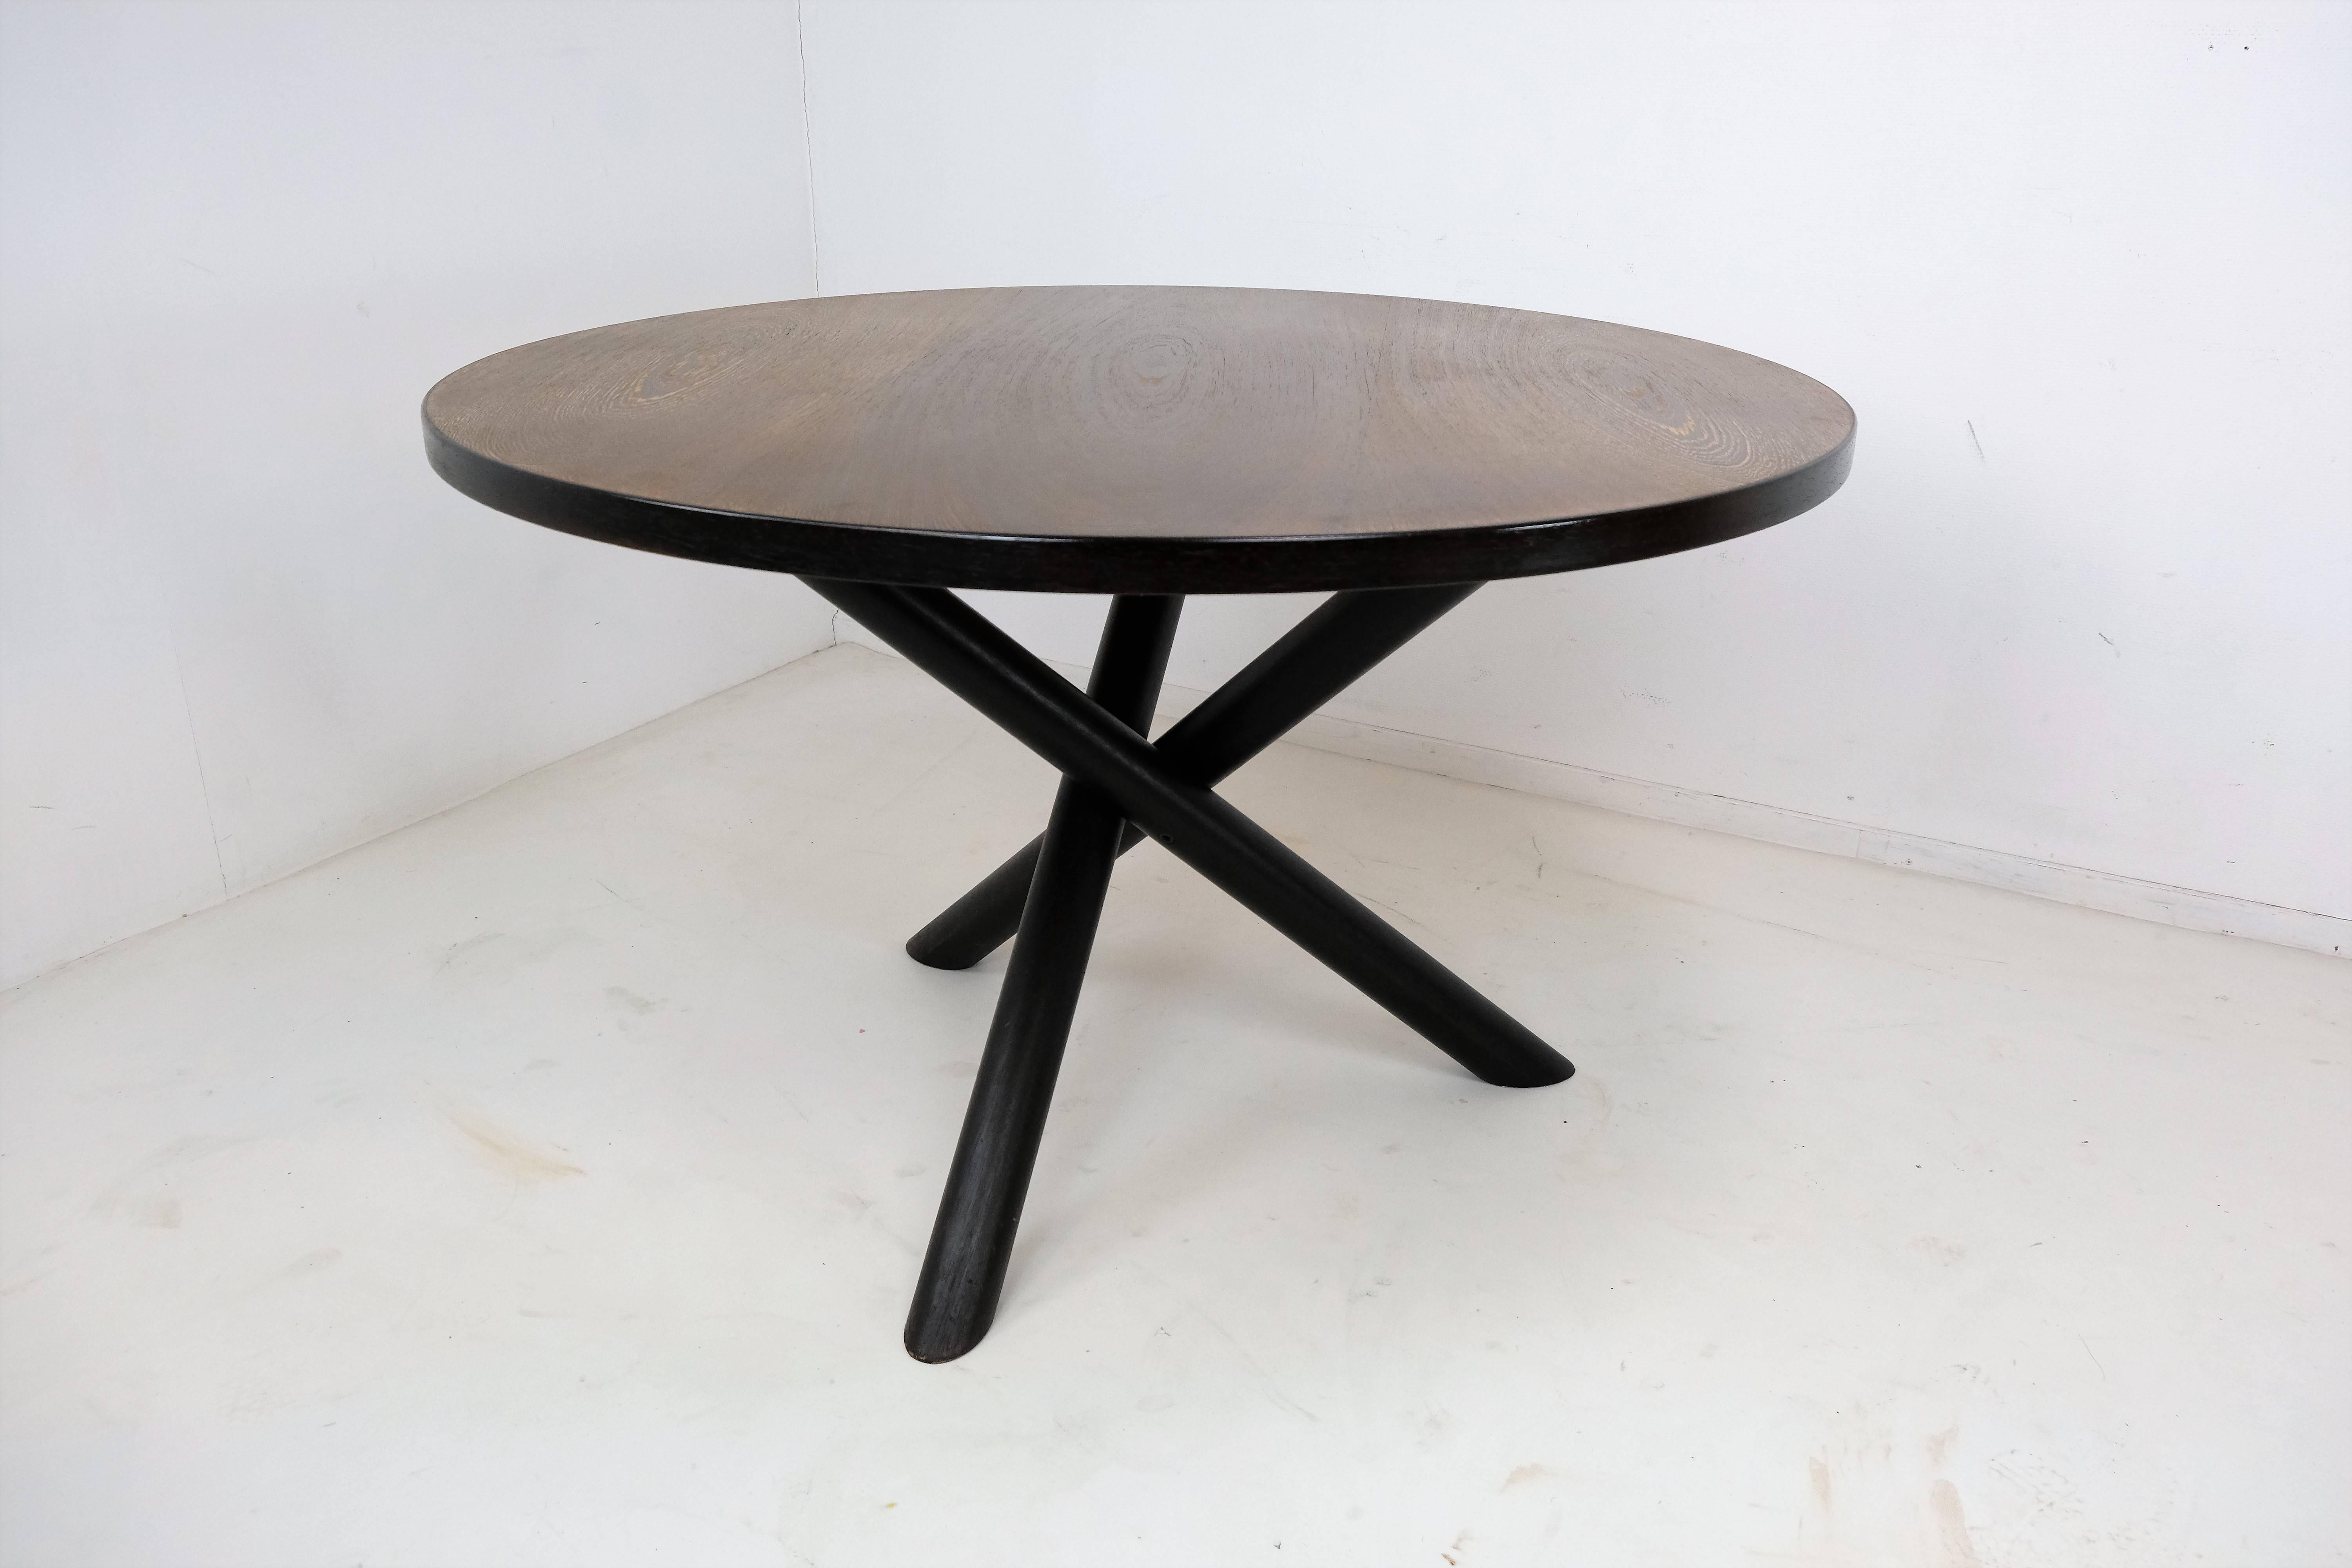 Dining table in wengé by Martin Visser for t Spectrum, the Netherlands, 1960s.

Round dining table with tripod base. This dining table has an interesting base, three legs are combined into a solid construction. A natural expression is created by